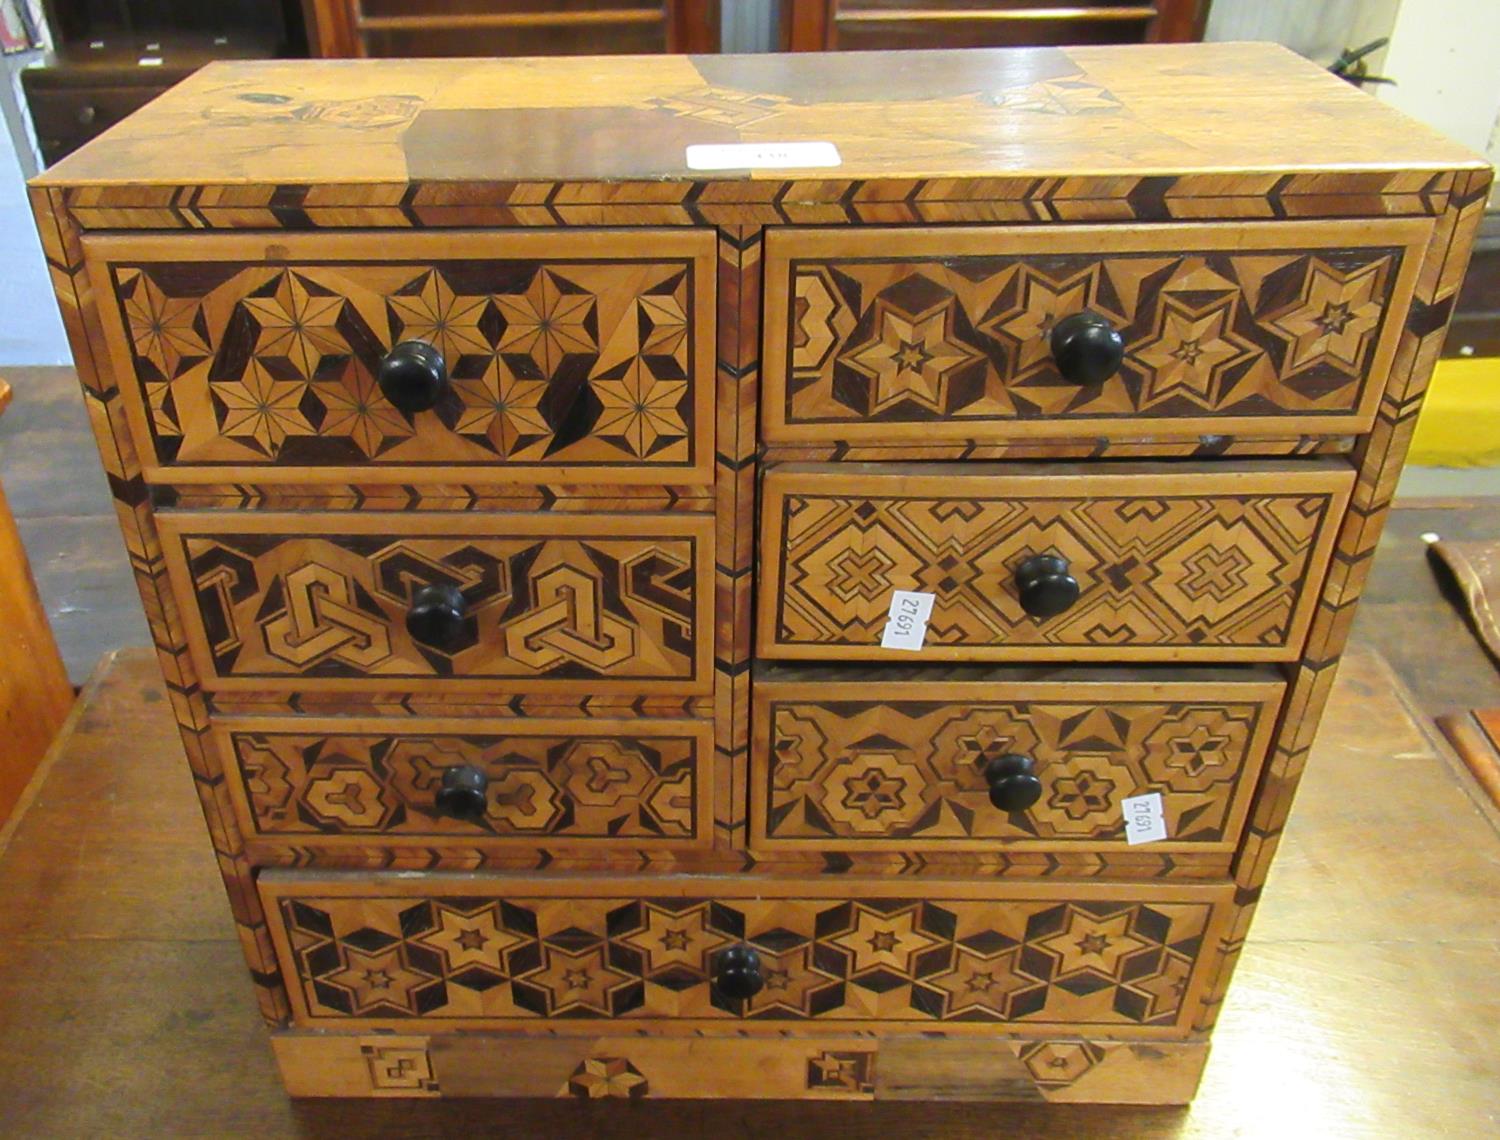 Japanese mixed woods parquetry table top bank of 7 drawers. (B.P. 21% + VAT)